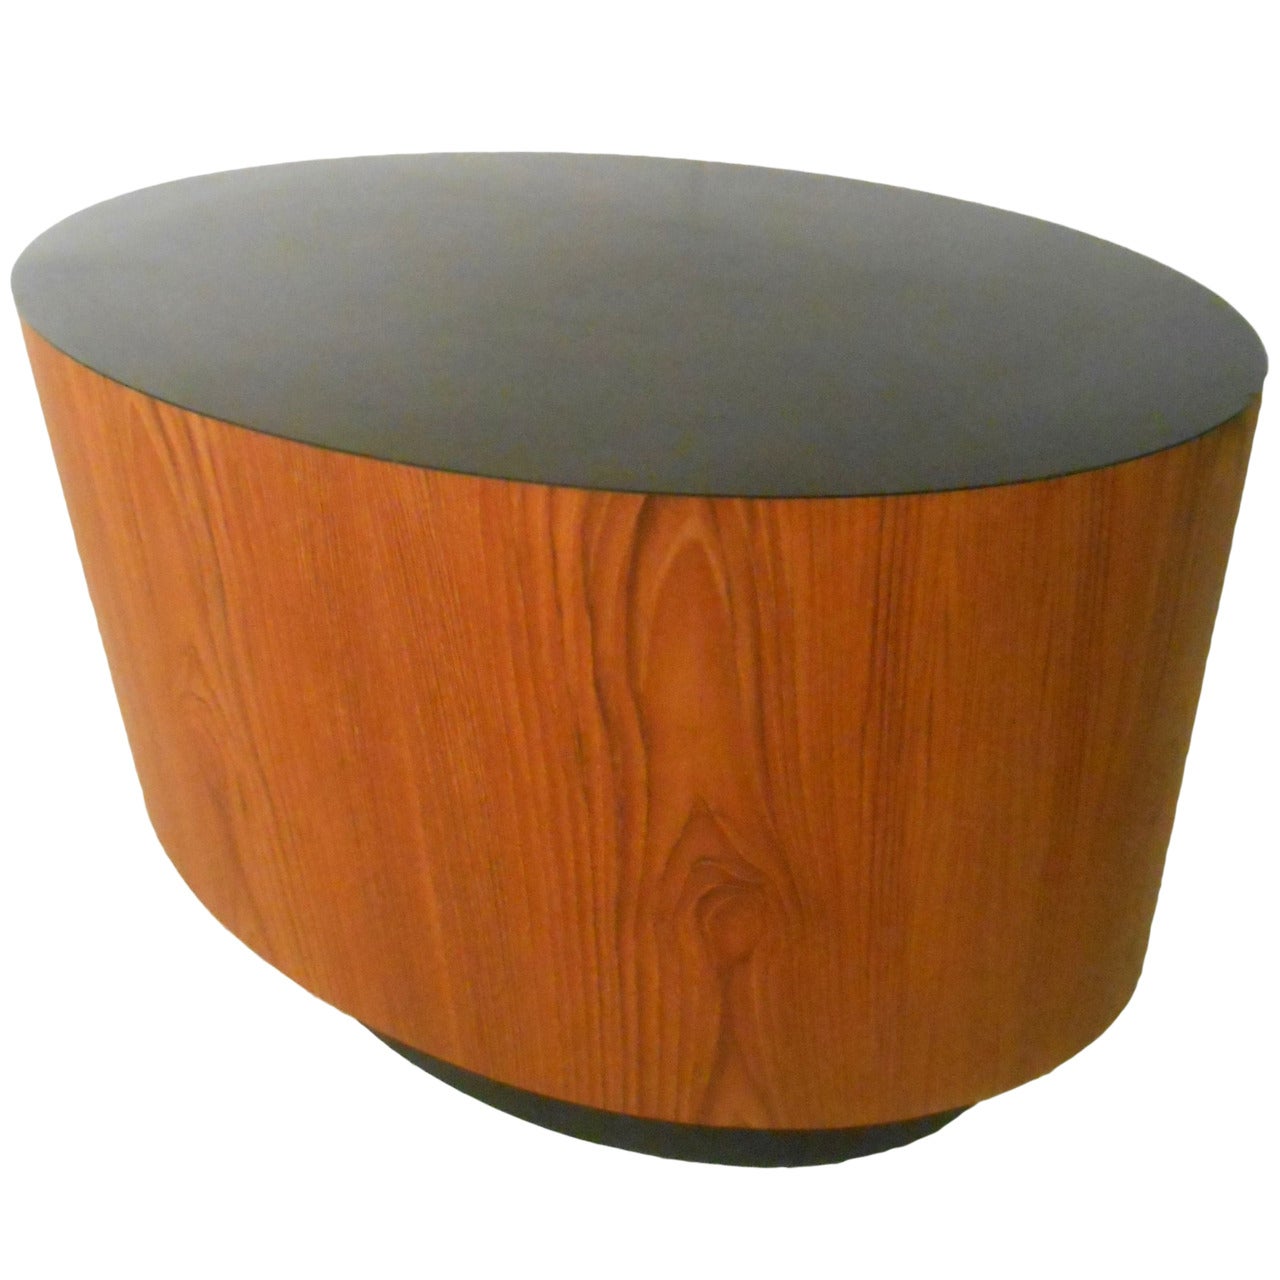 Unique Mid-Century Modern Adrian Pearsall Style Side Table